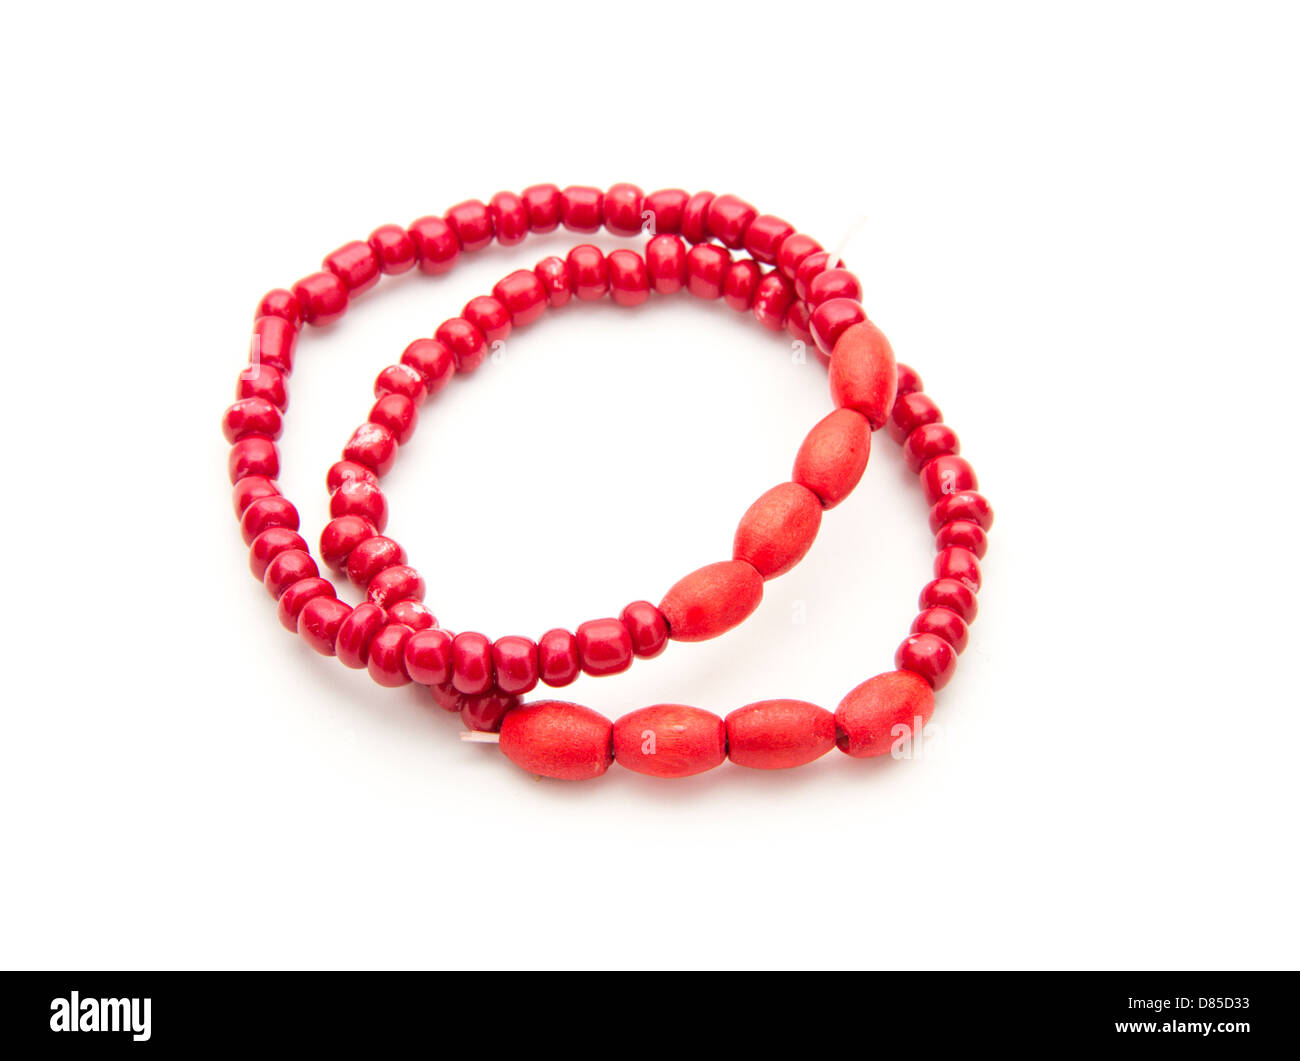 children's red bracelets isolated on white background Stock Photo